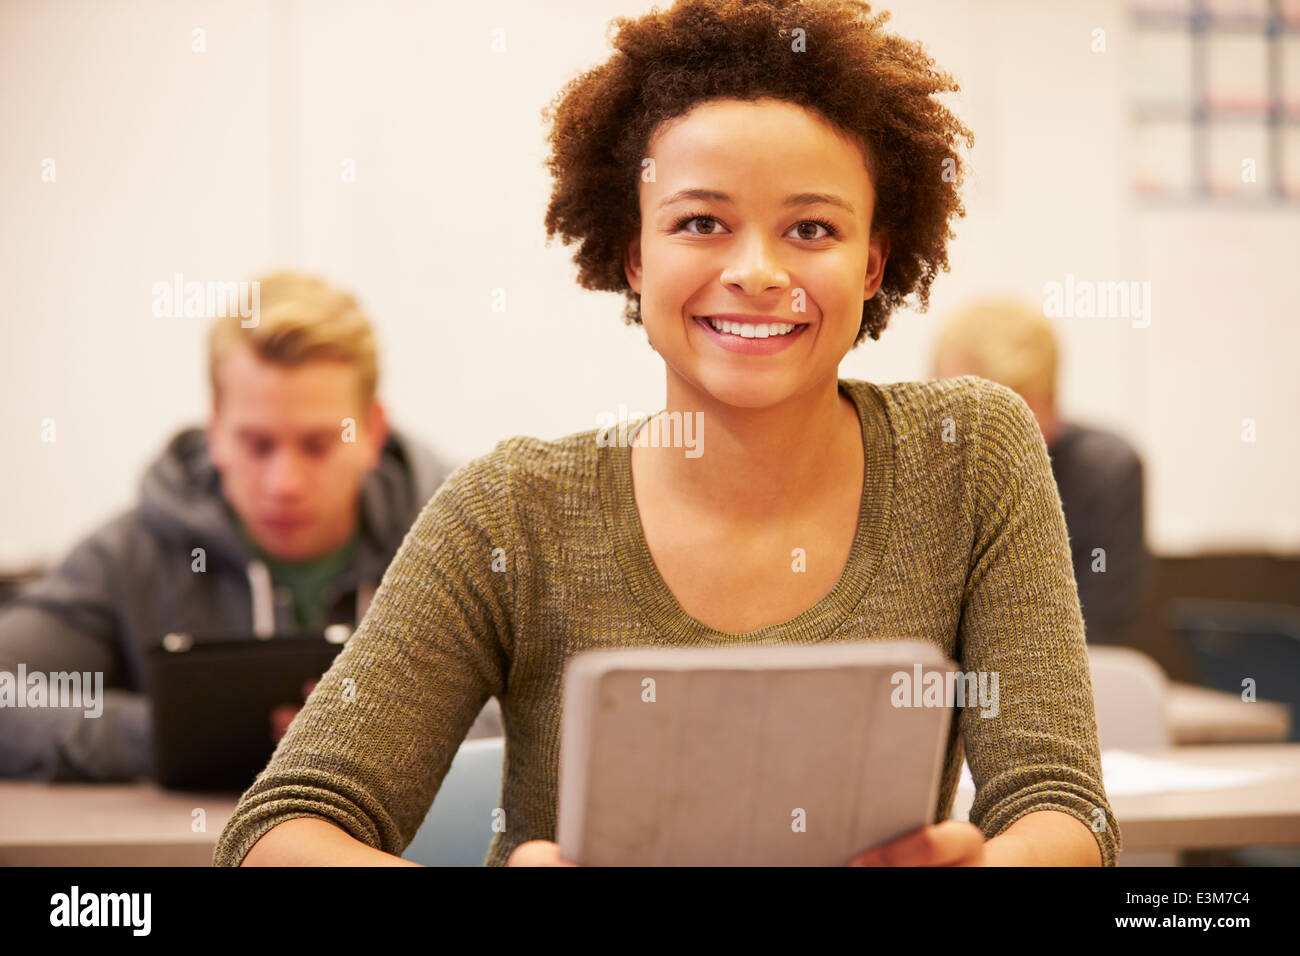 High School Student At Desk In Class Using Digital Tablet Stock Photo